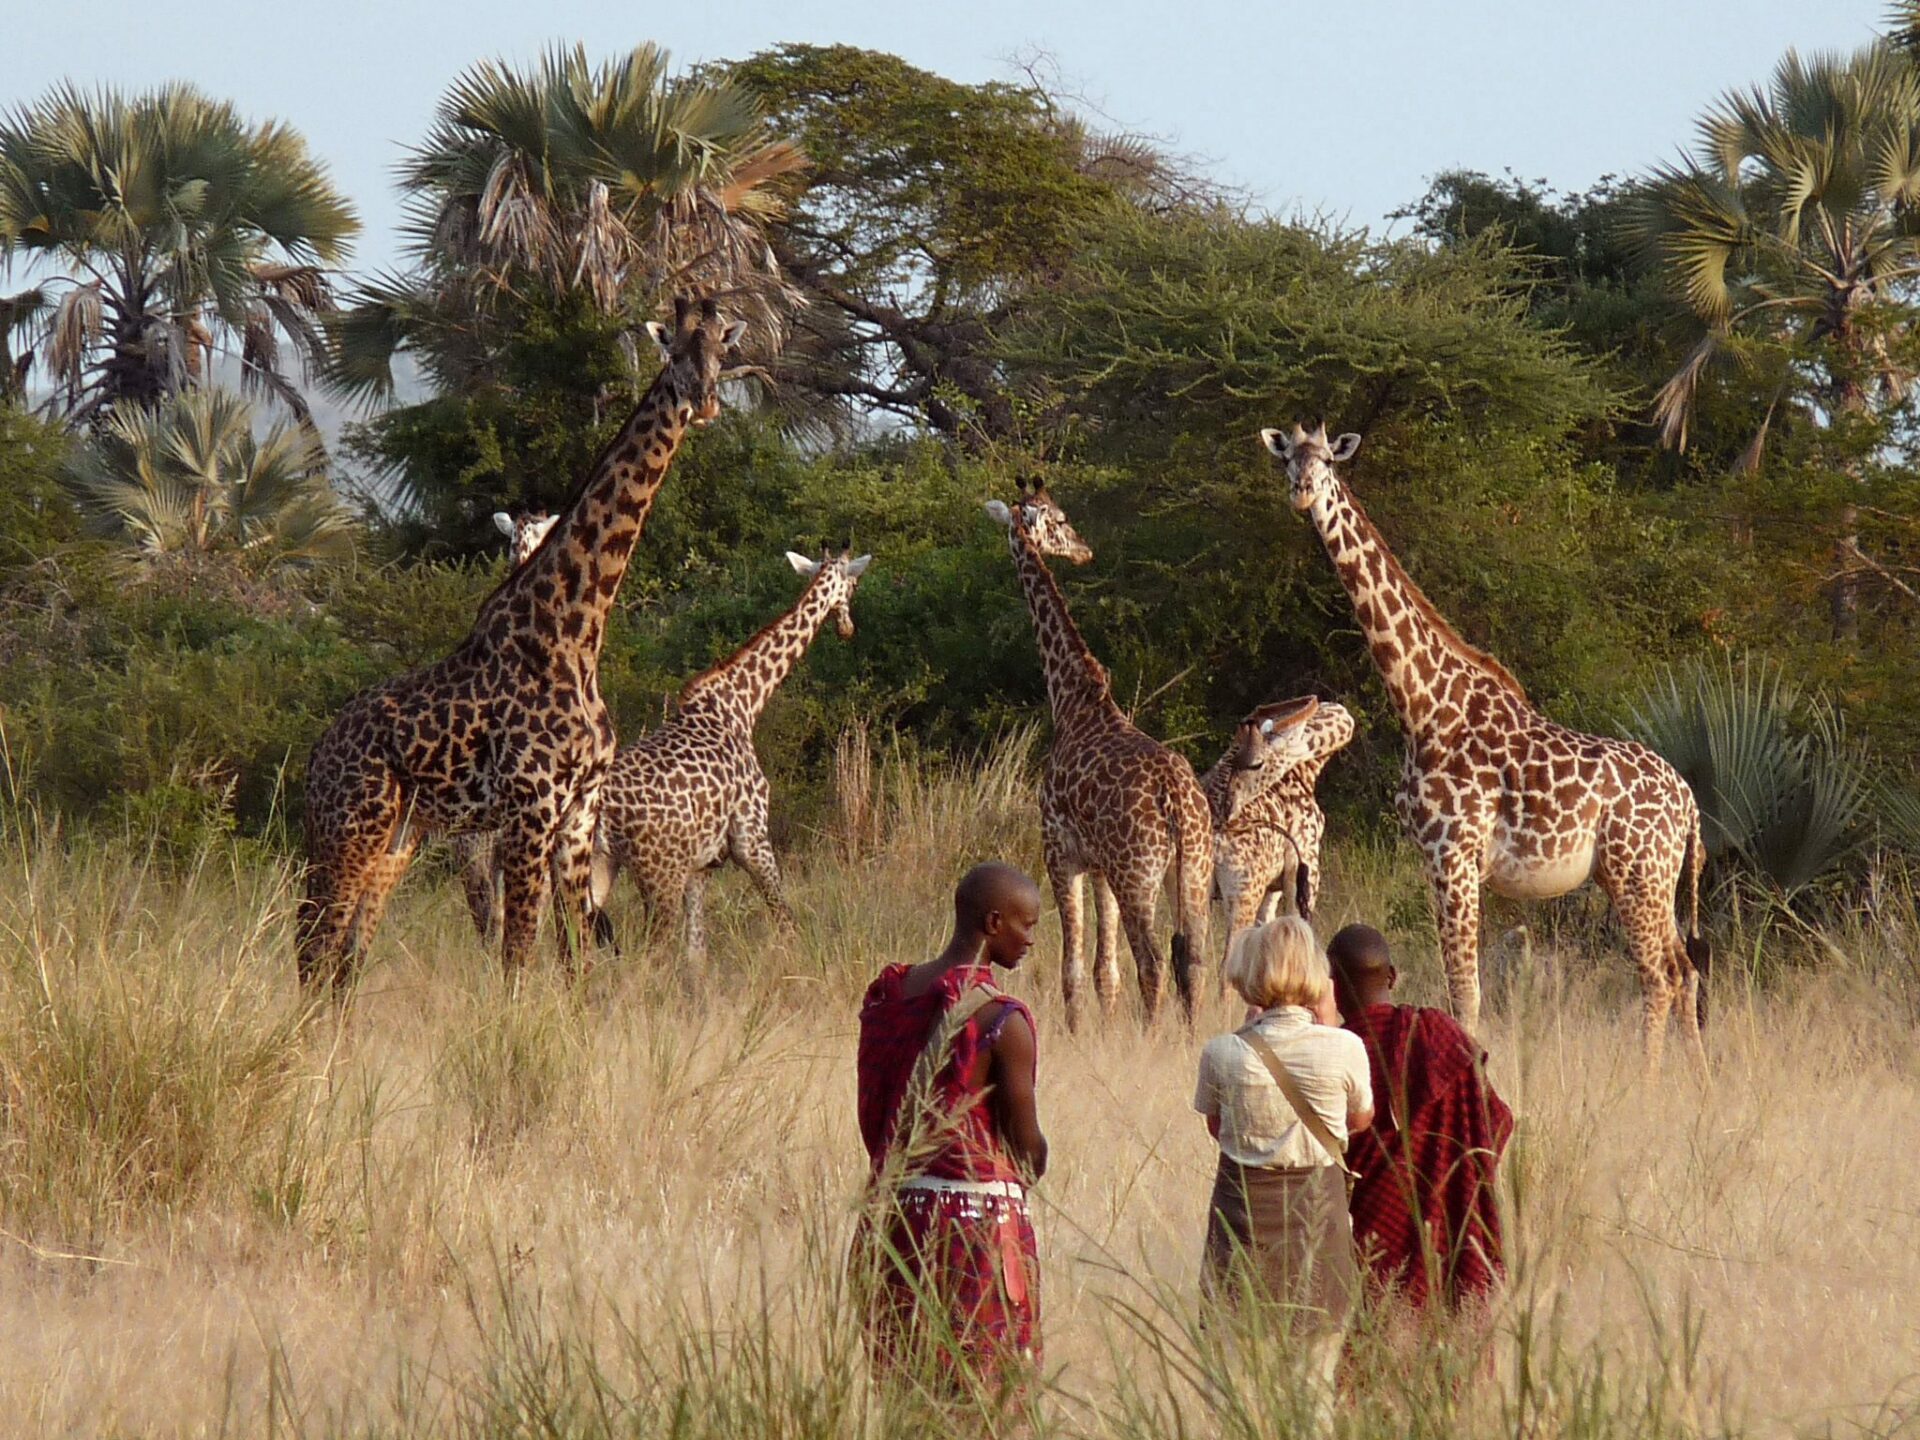 guest on foot with two Maasai guides taking a photo of our tower of giraffes on our luxury Tanzania safari